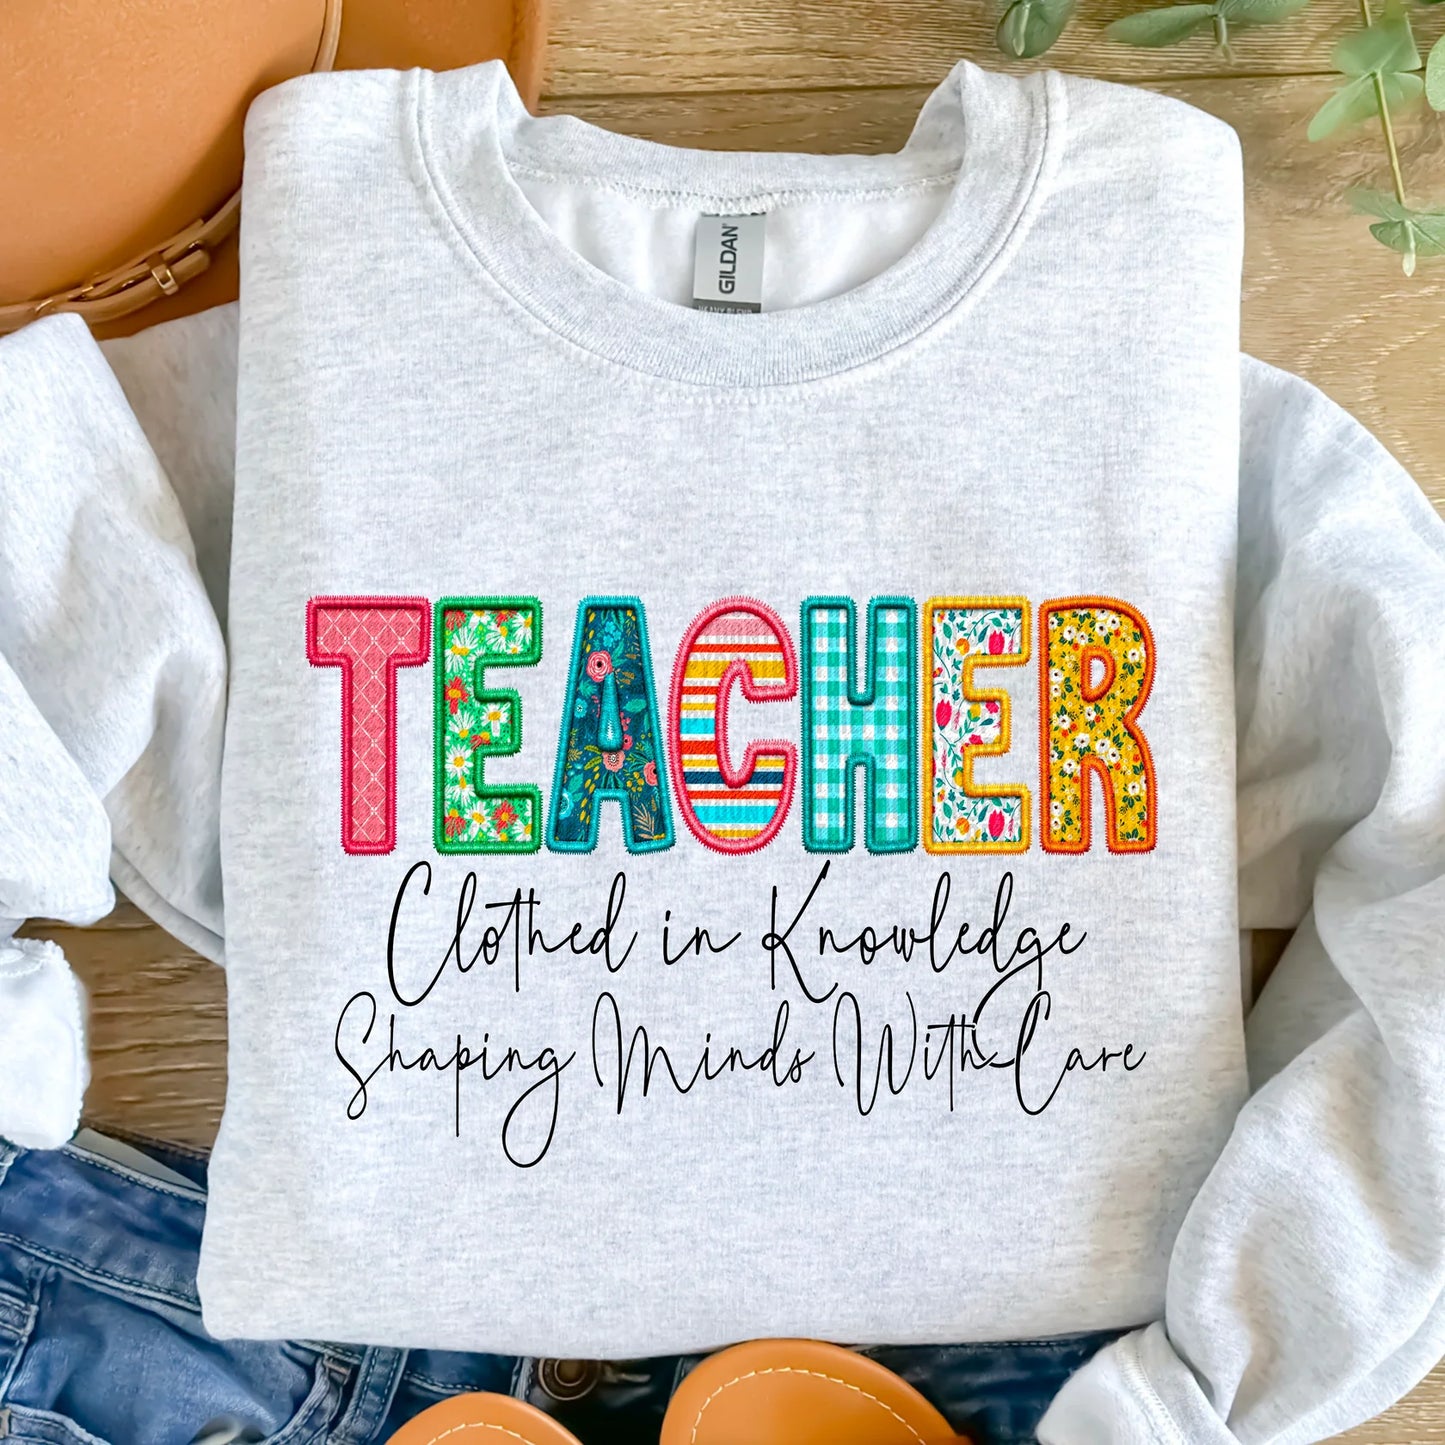 Teacher- Clothed in knowledge shaping minds with care